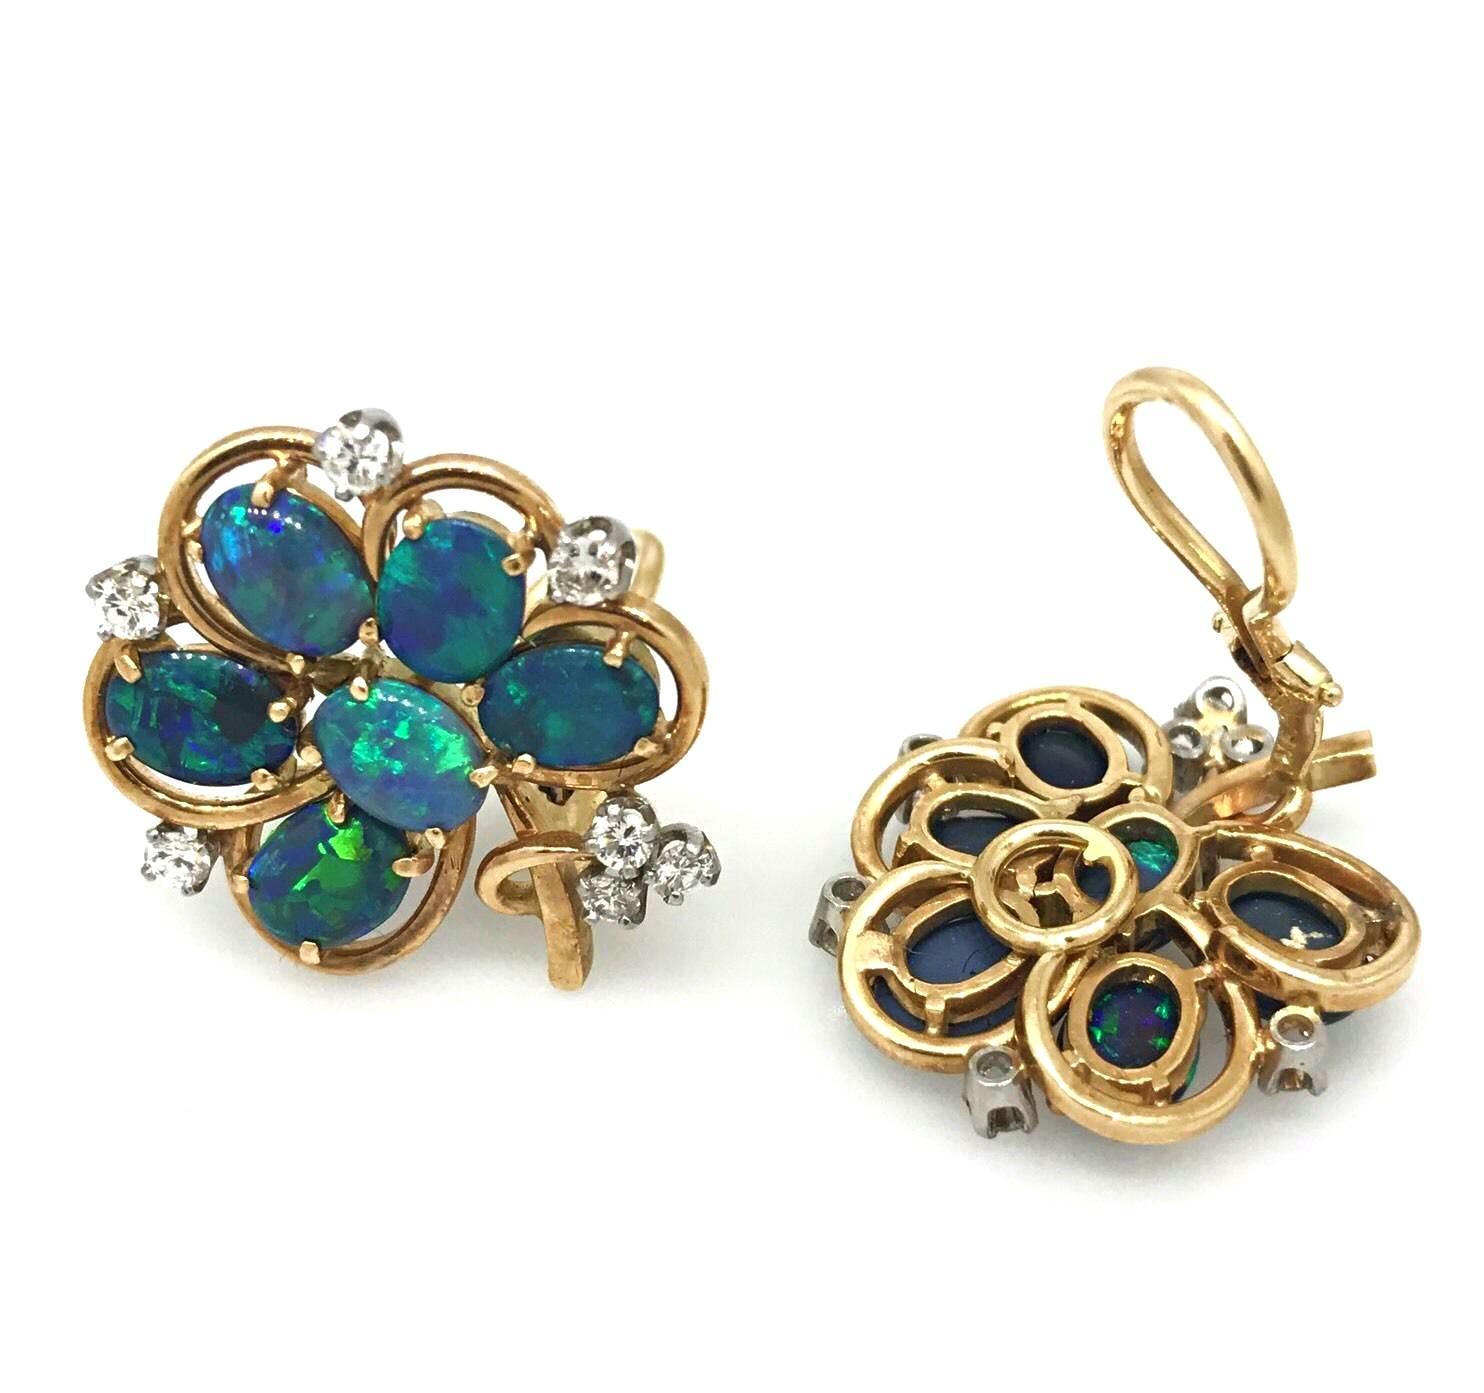 Vintage black Opal flower earrings in 14k yellow and white Gold featuring 12 oval black Opals with green and blue flashes, set with round brilliant diamonds, totaling .56 carats, SI1 clarity, H color. Fastenings are omega backs without posts.